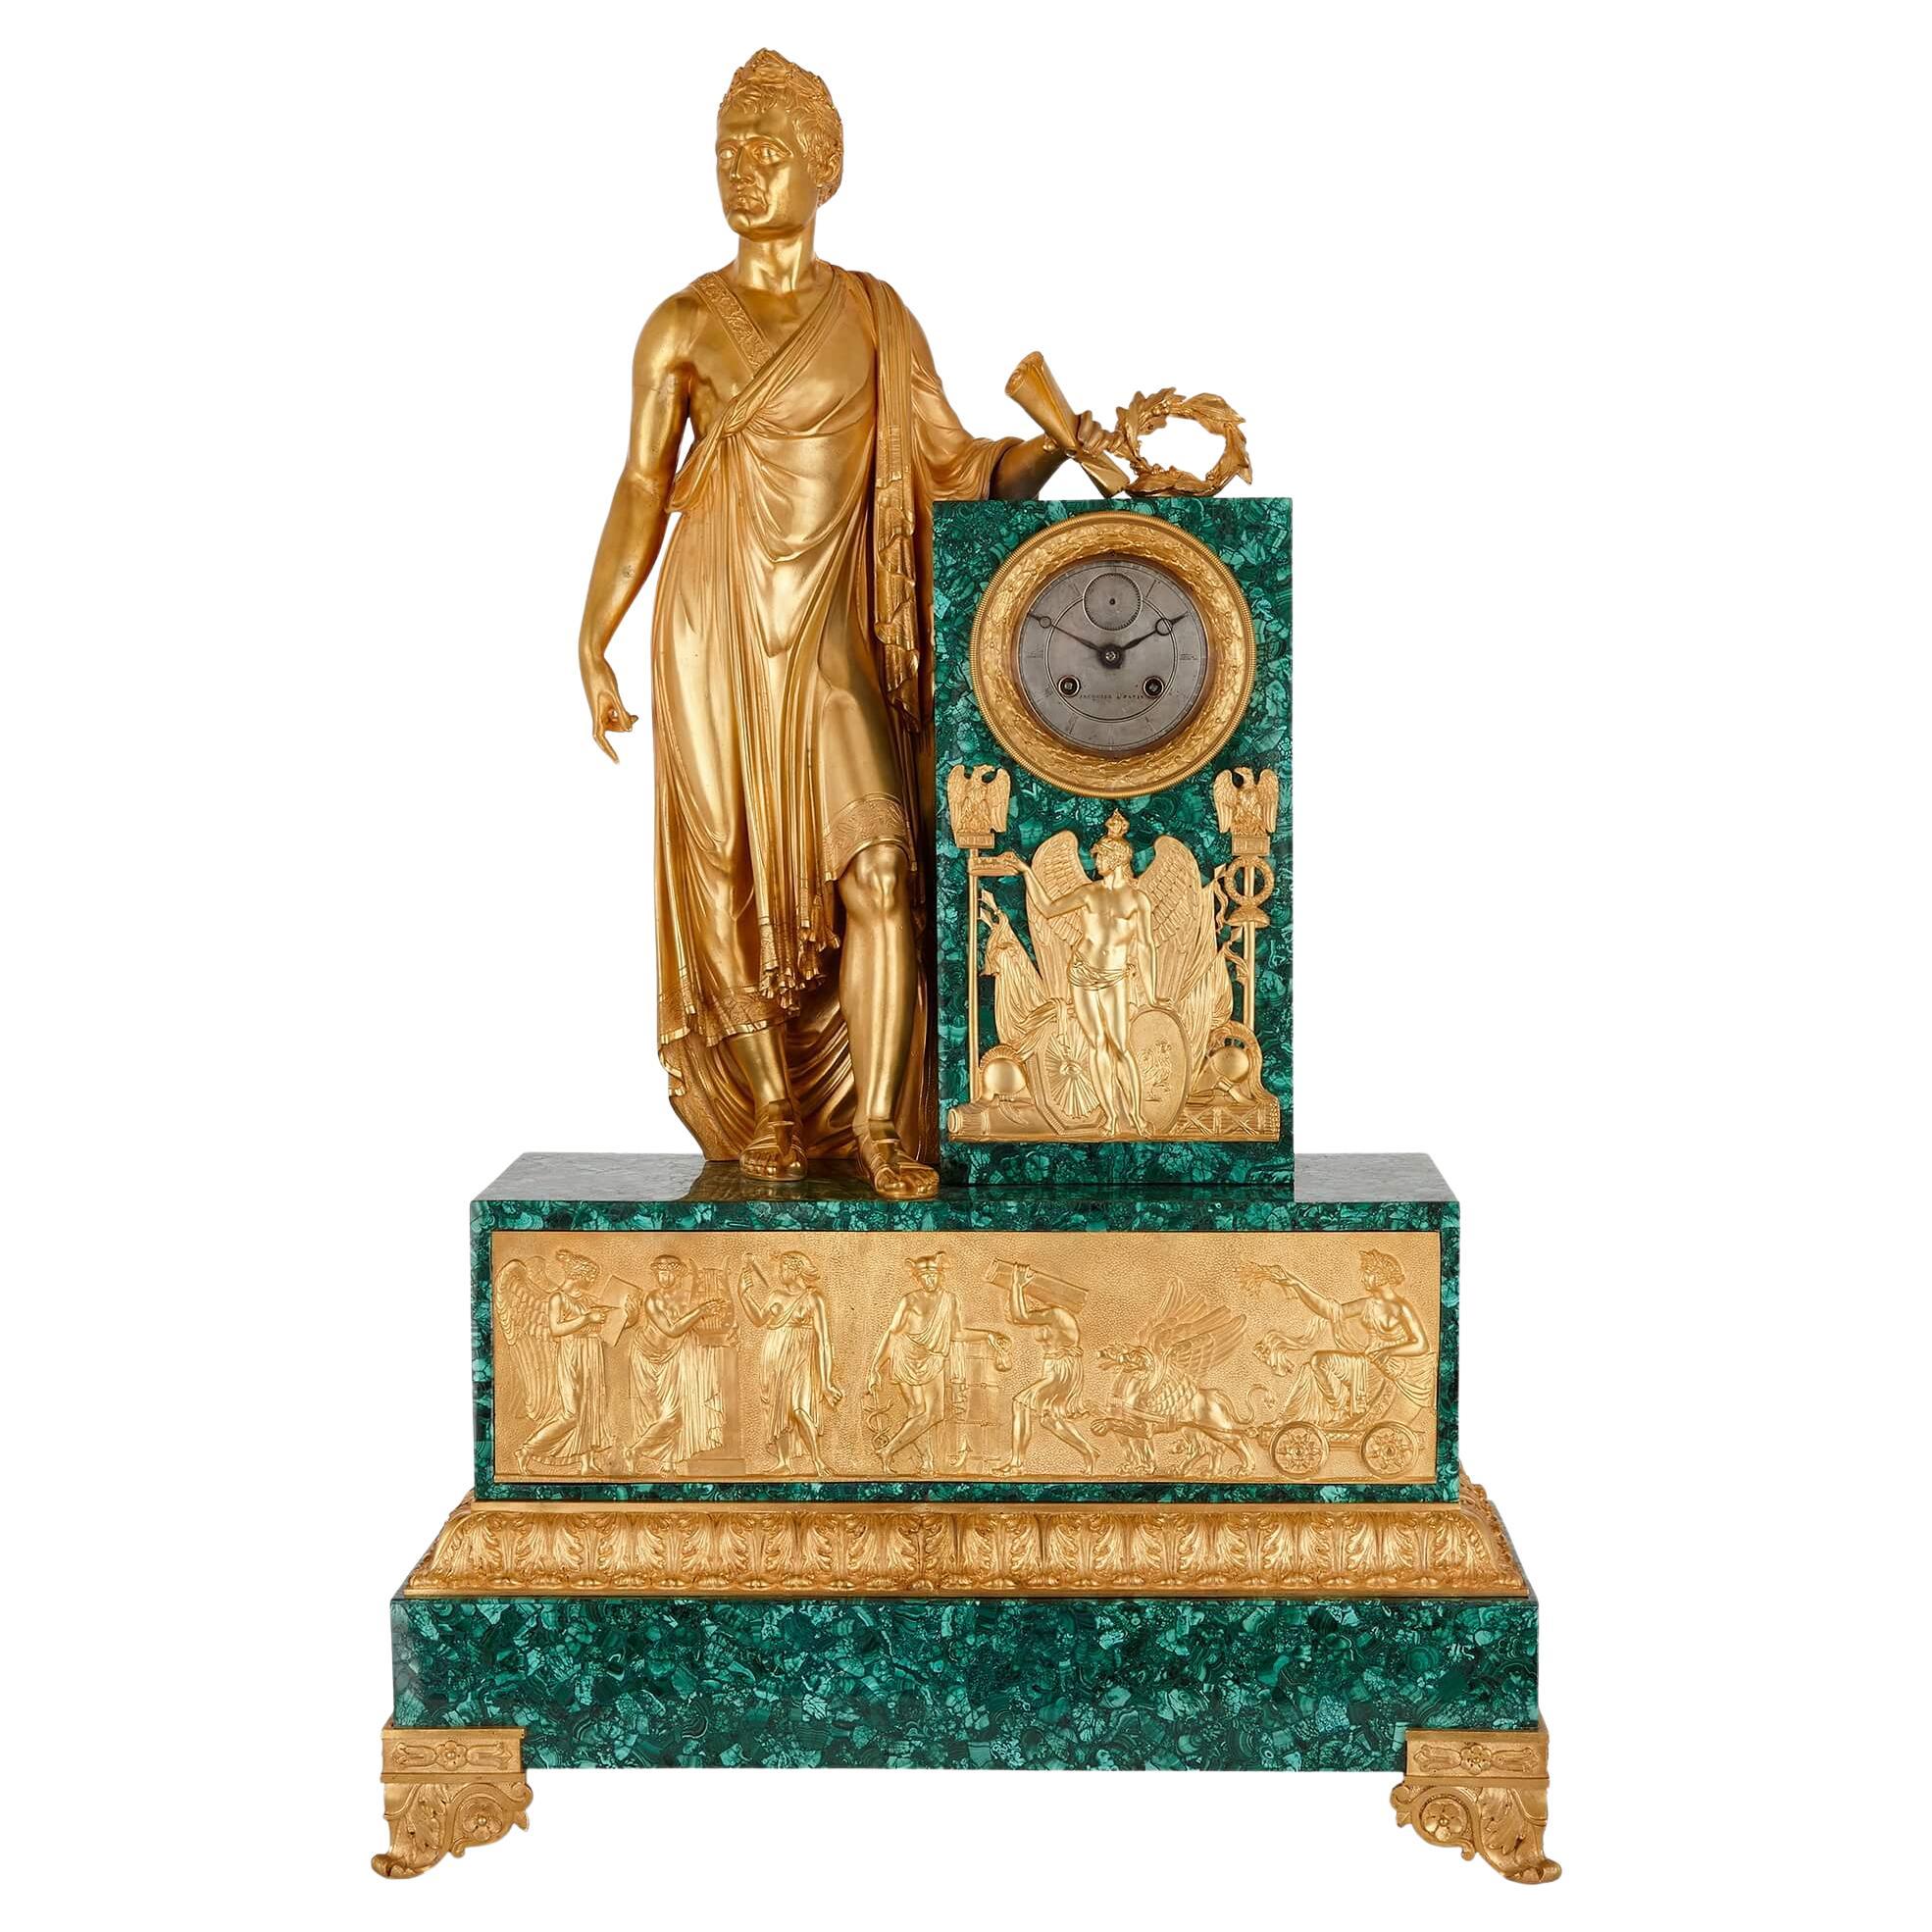 Large and Very Fine French Empire Period Ormolu and Malachite Mantel Clock